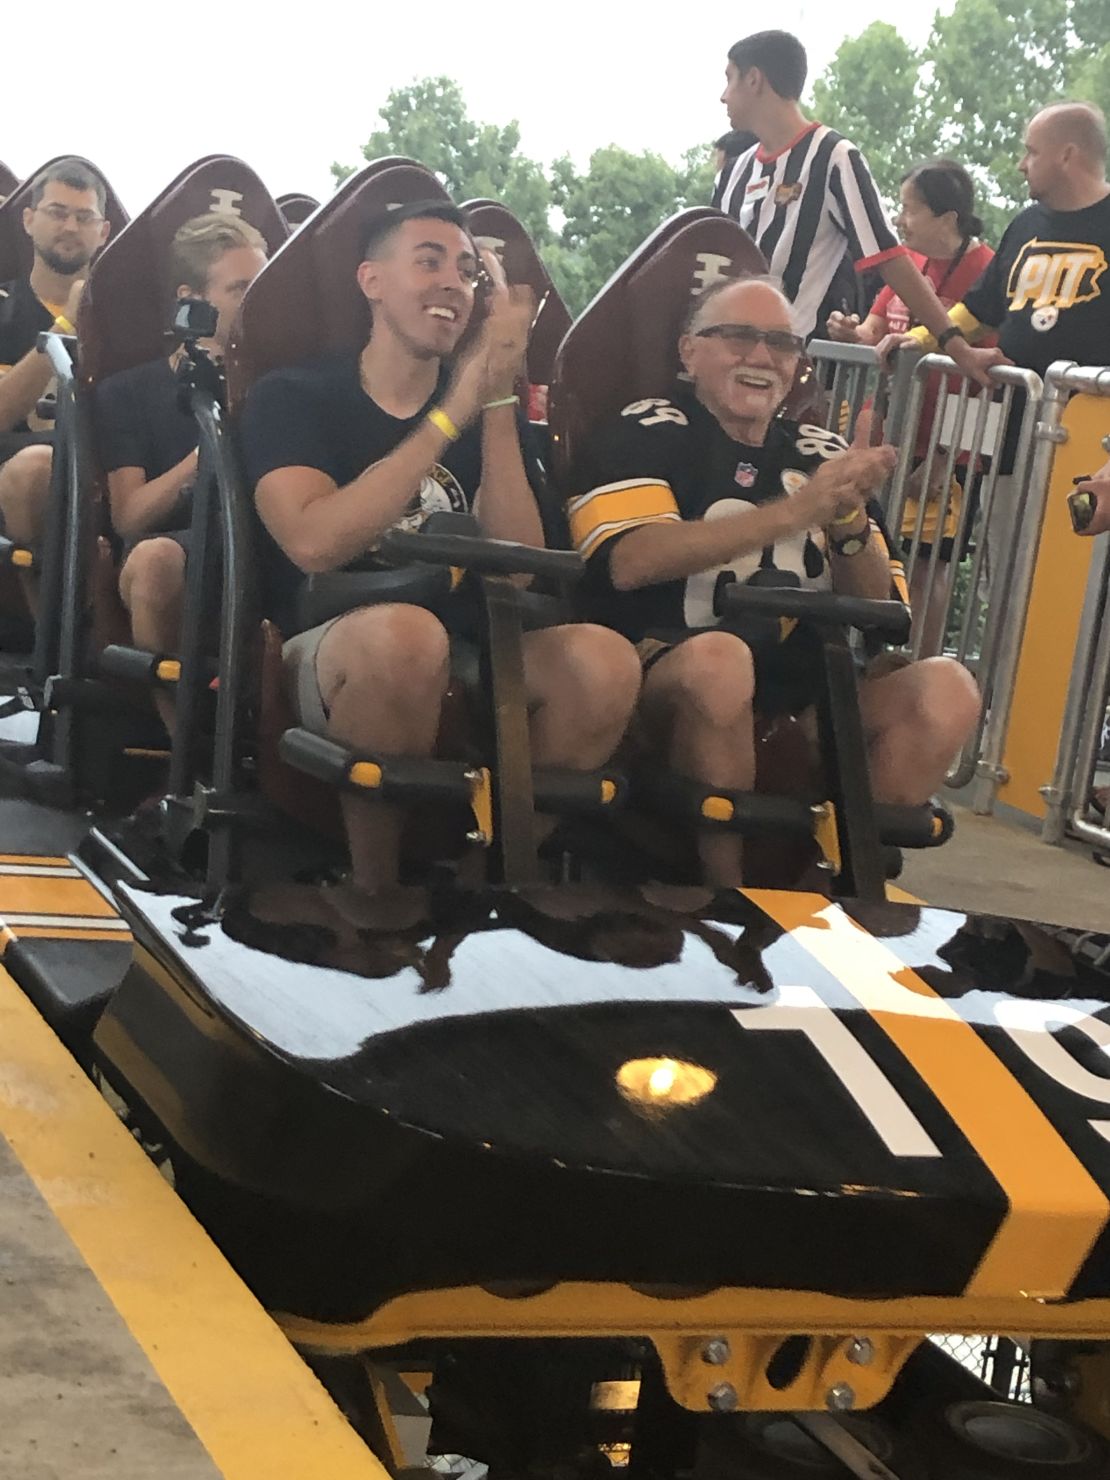 Pittsburgh residents Jack Thompson (right), 67, and his son, Gavin Virag, 28, won a contest to be the first riders on Steel Curtain. This is their reaction at the end of the ride on Friday, July 12, 2019.